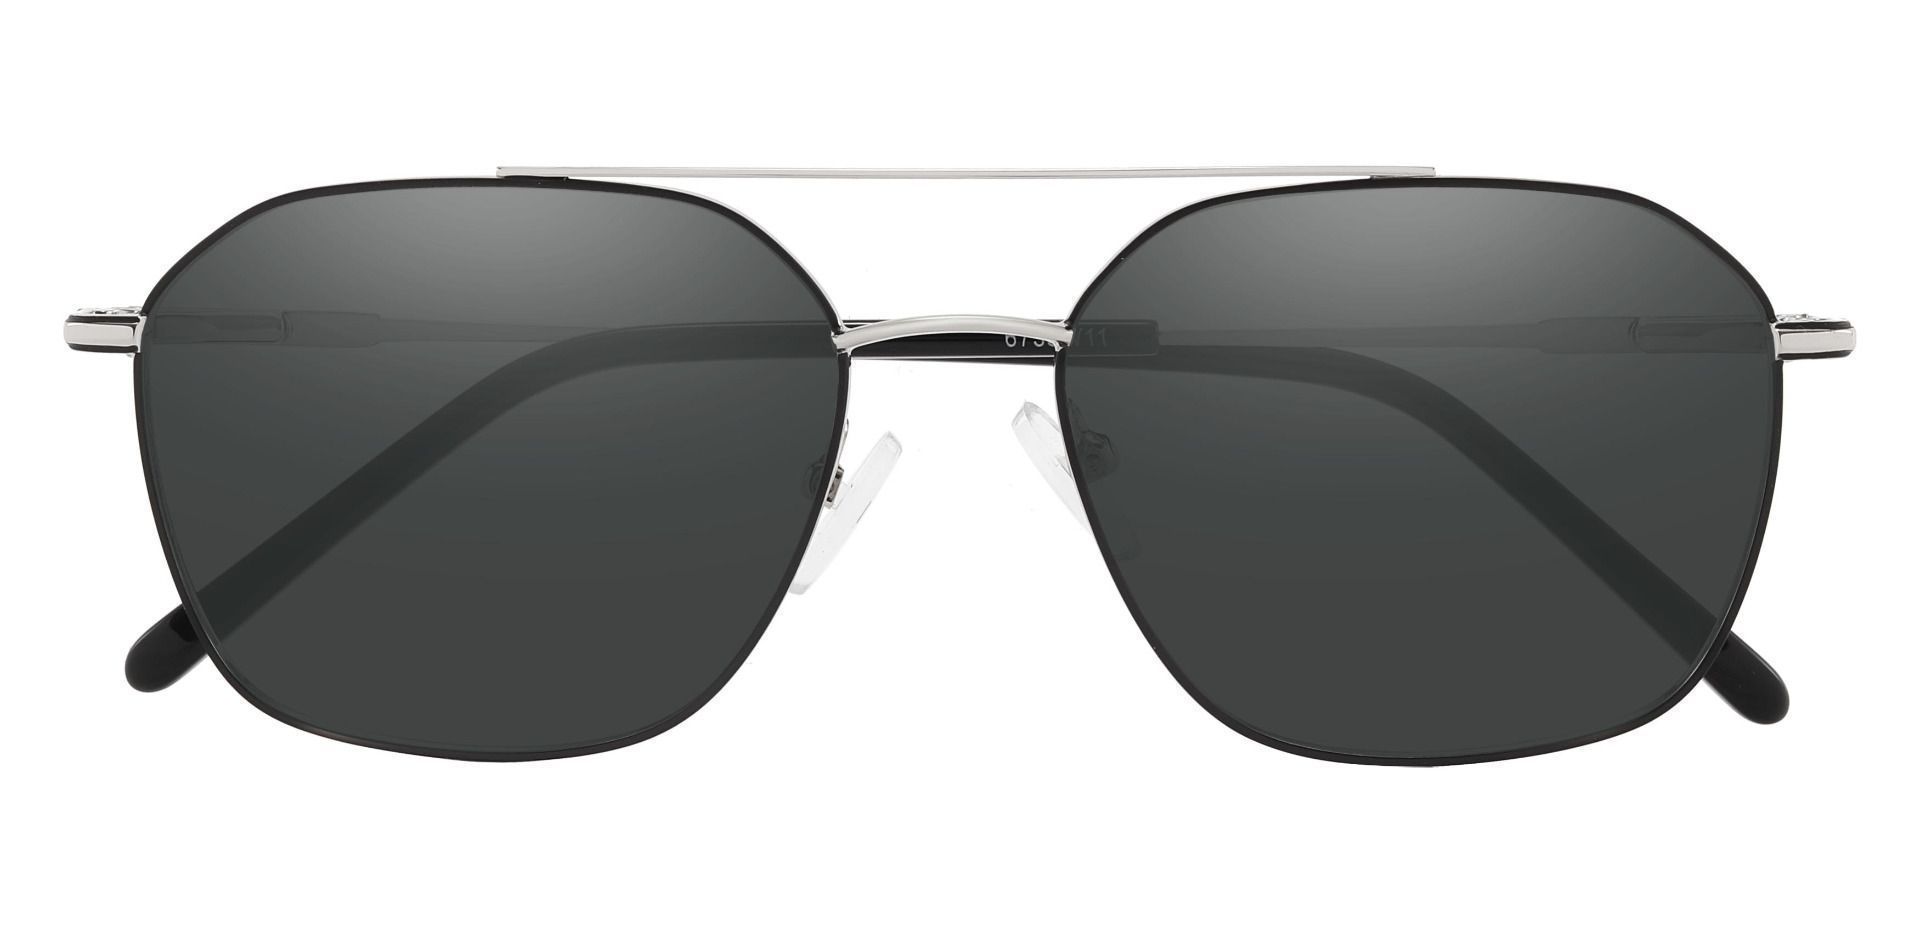 Harvey Aviator Lined Bifocal Sunglasses - Silver Frame With Gray Lenses